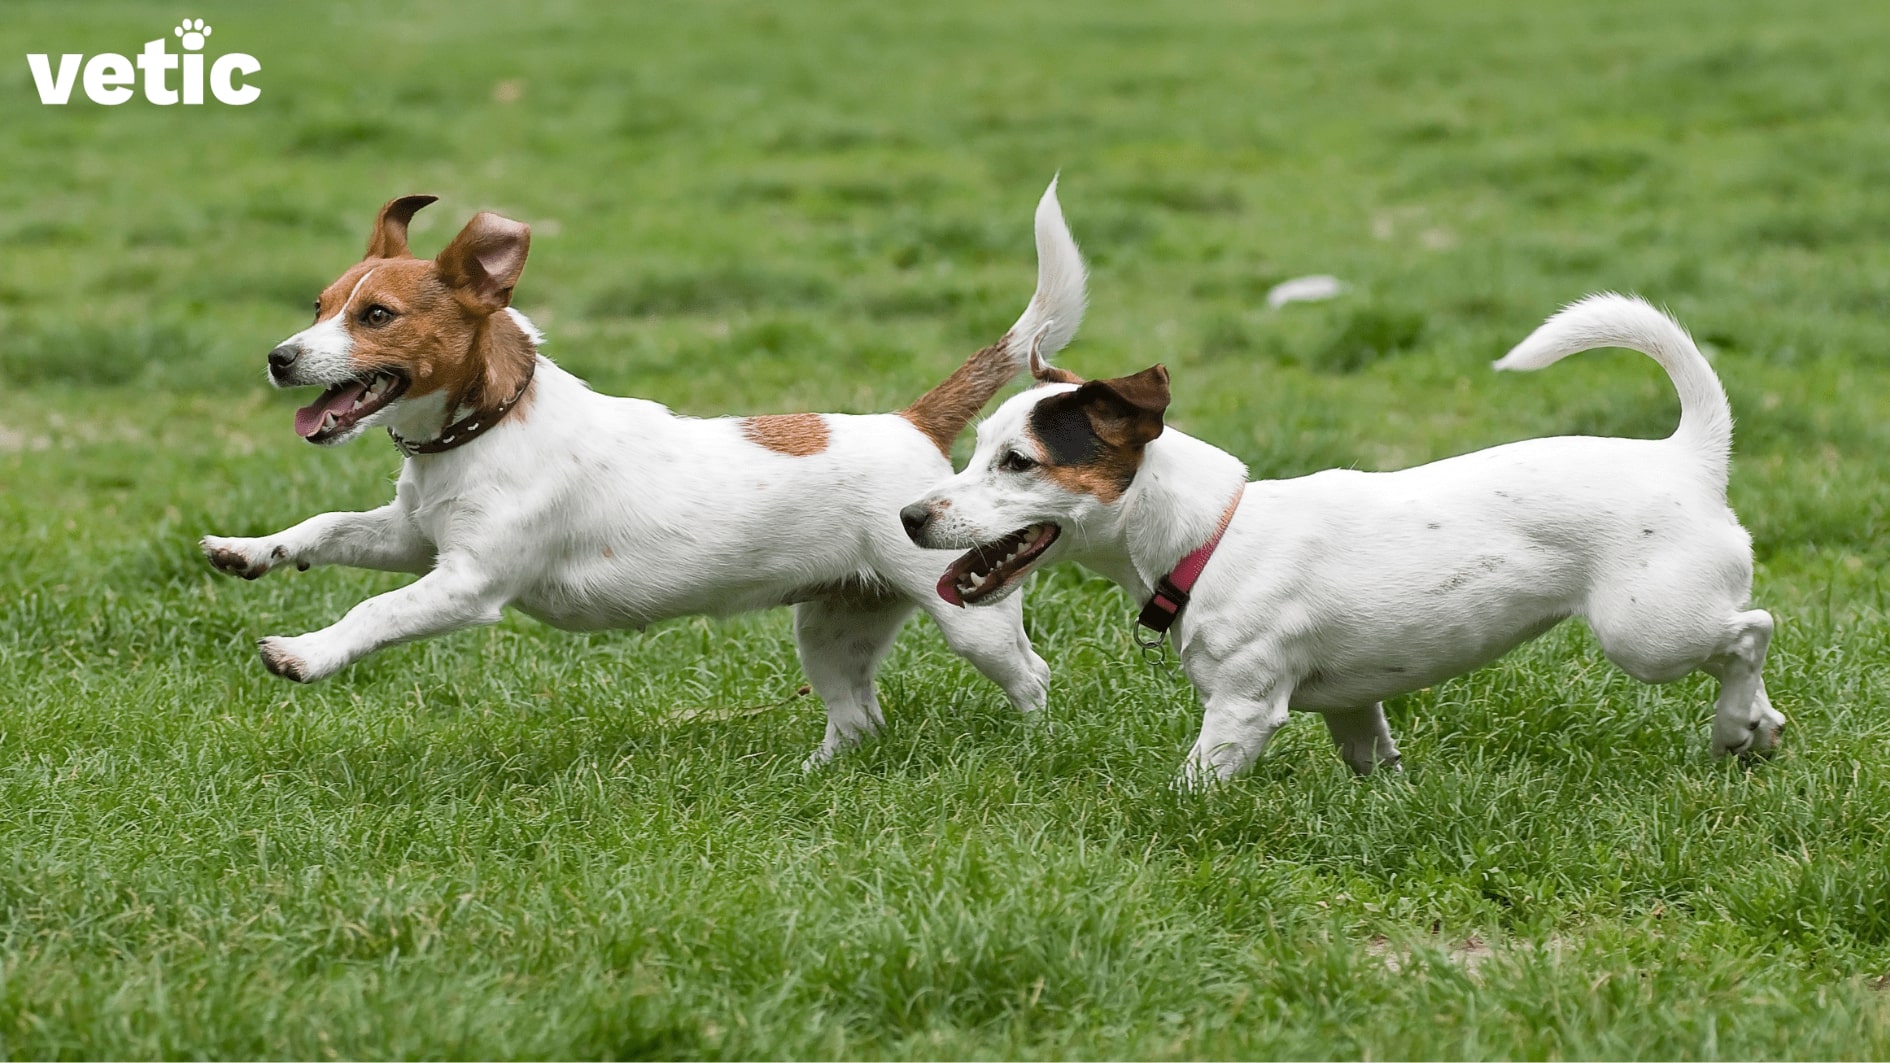 jack russell terriers running on grass